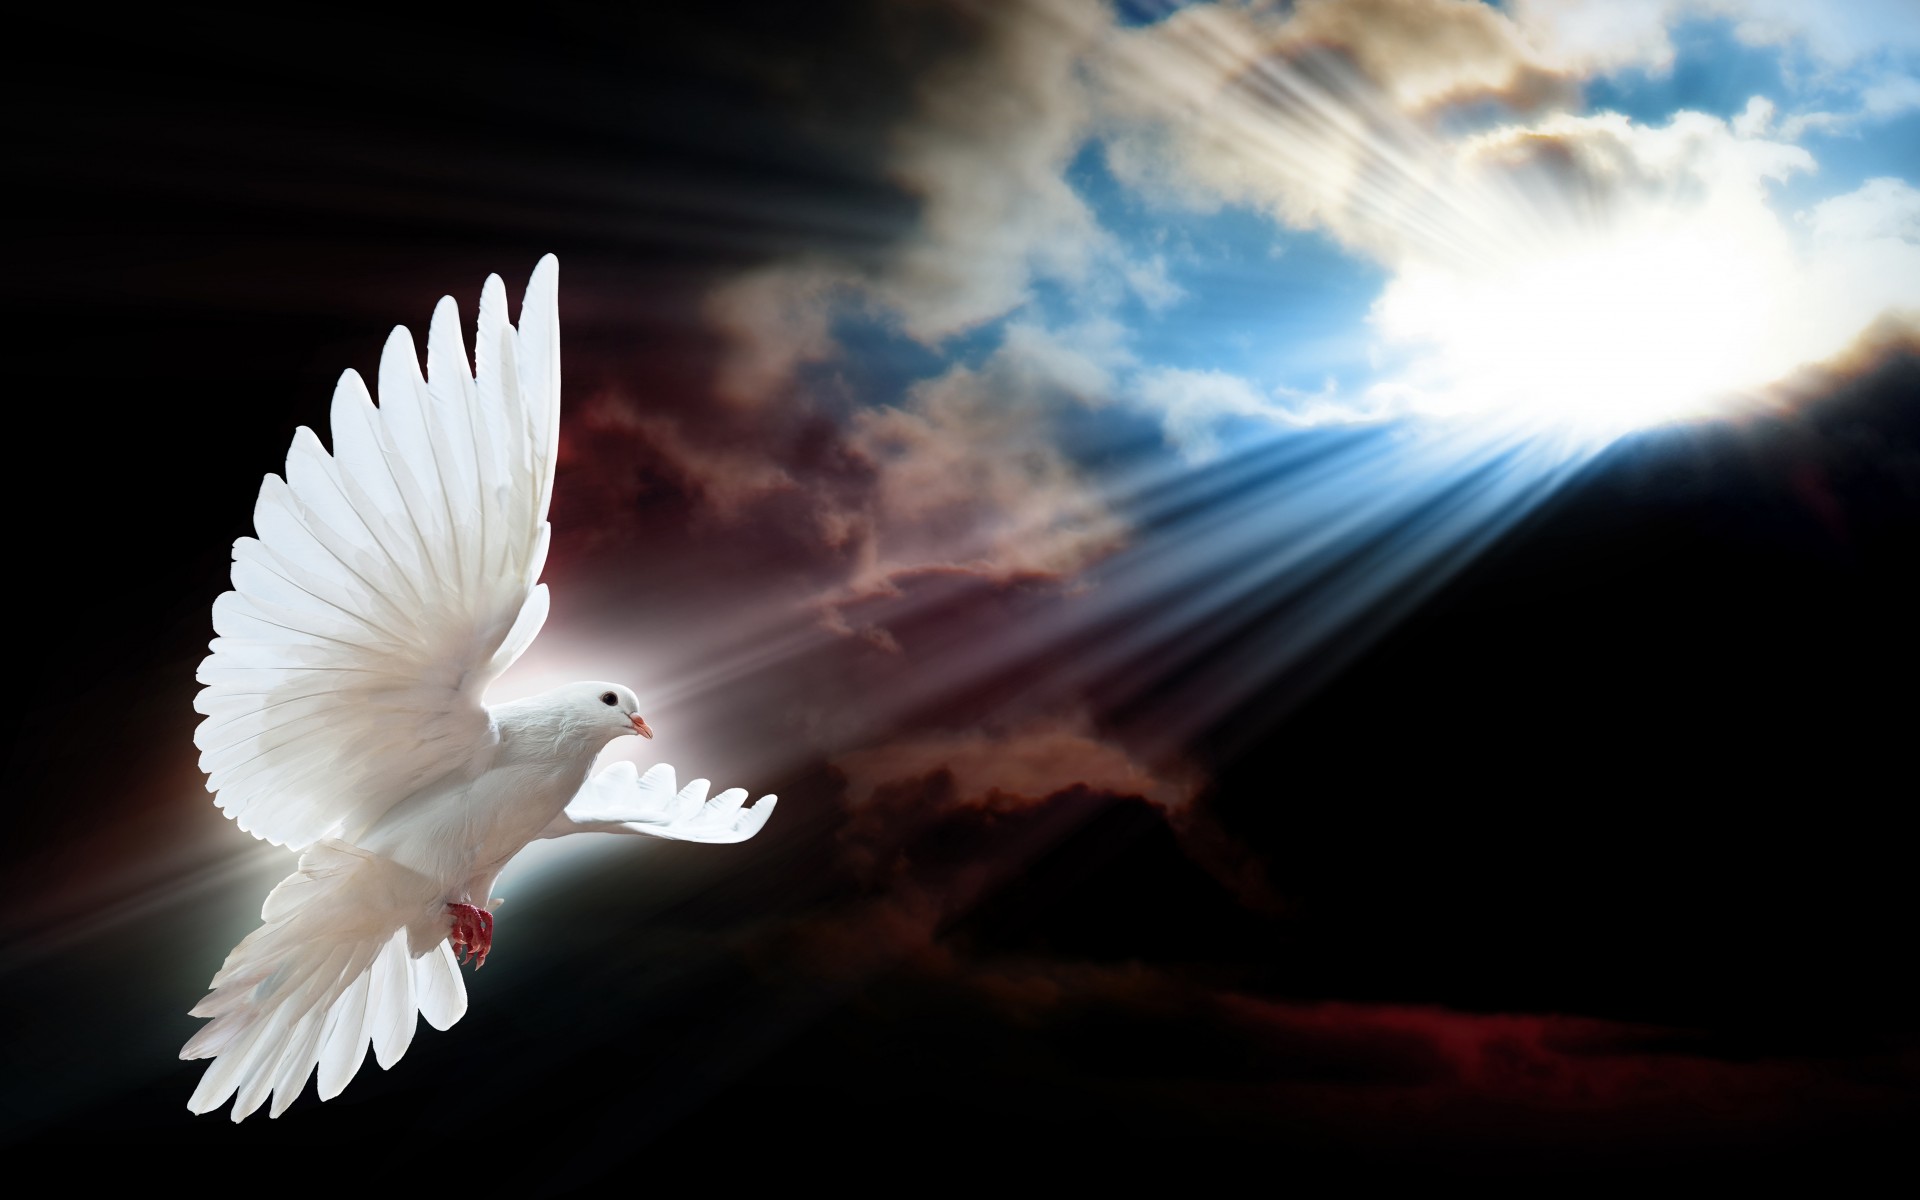 White-Dove-symbol-of-freedom-seepage-sochevite-rays-through-the-dark-clouds-Desktop-Wallpaper-HD-for-mobile-phones-and-laptops-1920x1200